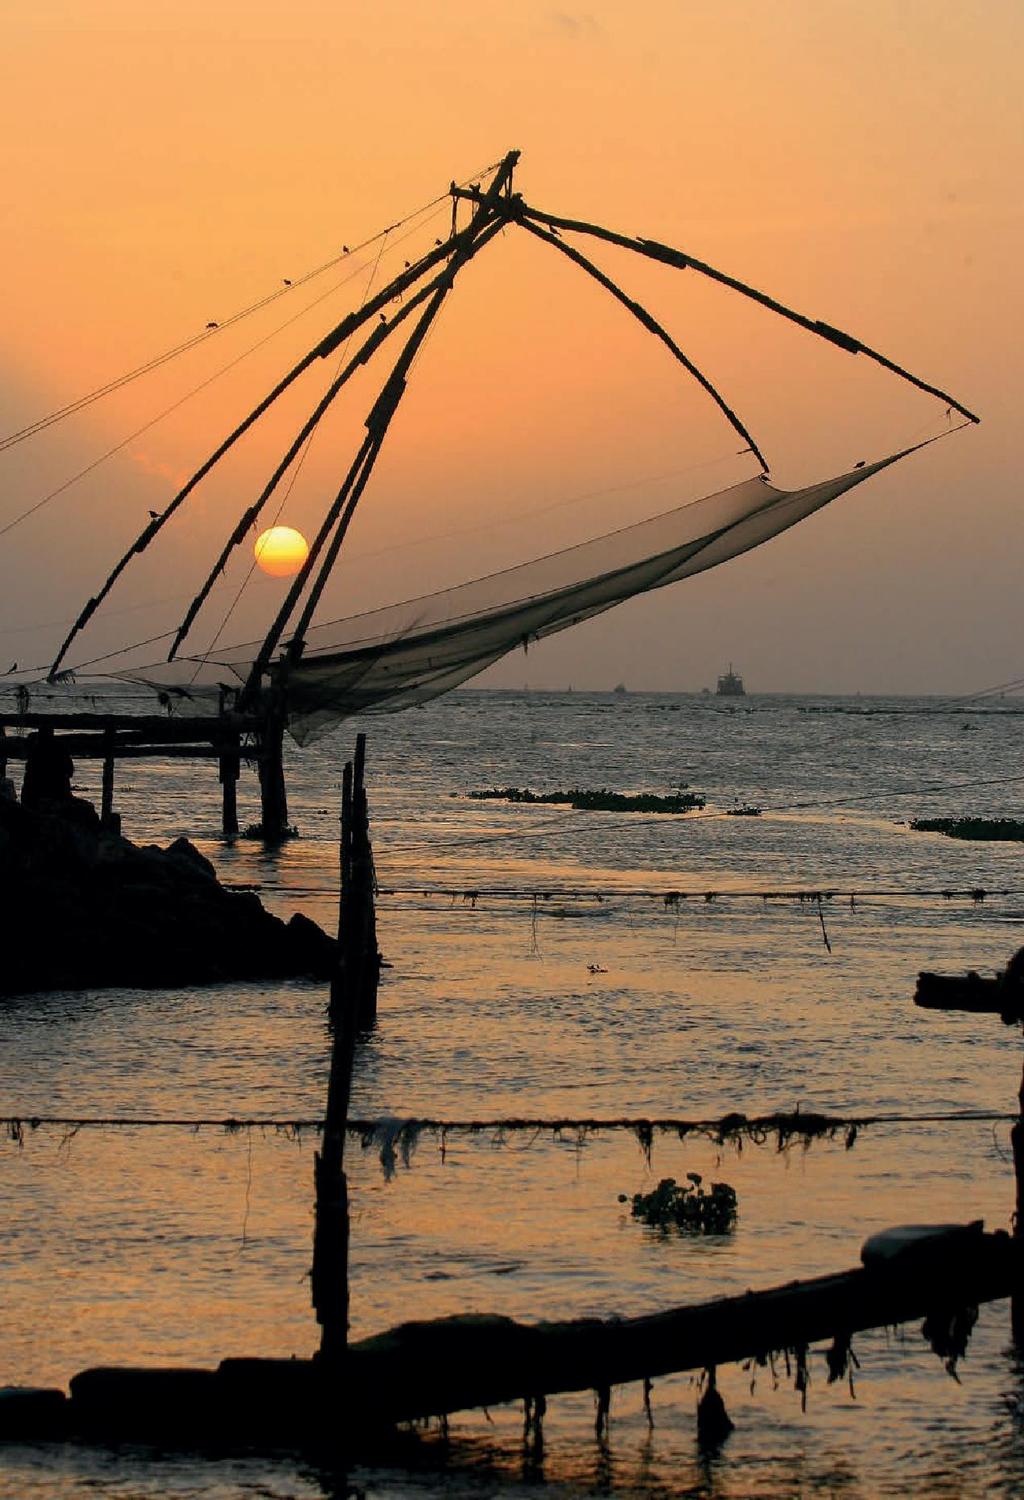 The trip ends in the port city of Kochi, with its blend of Portuguese, Dutch and British historic influences.